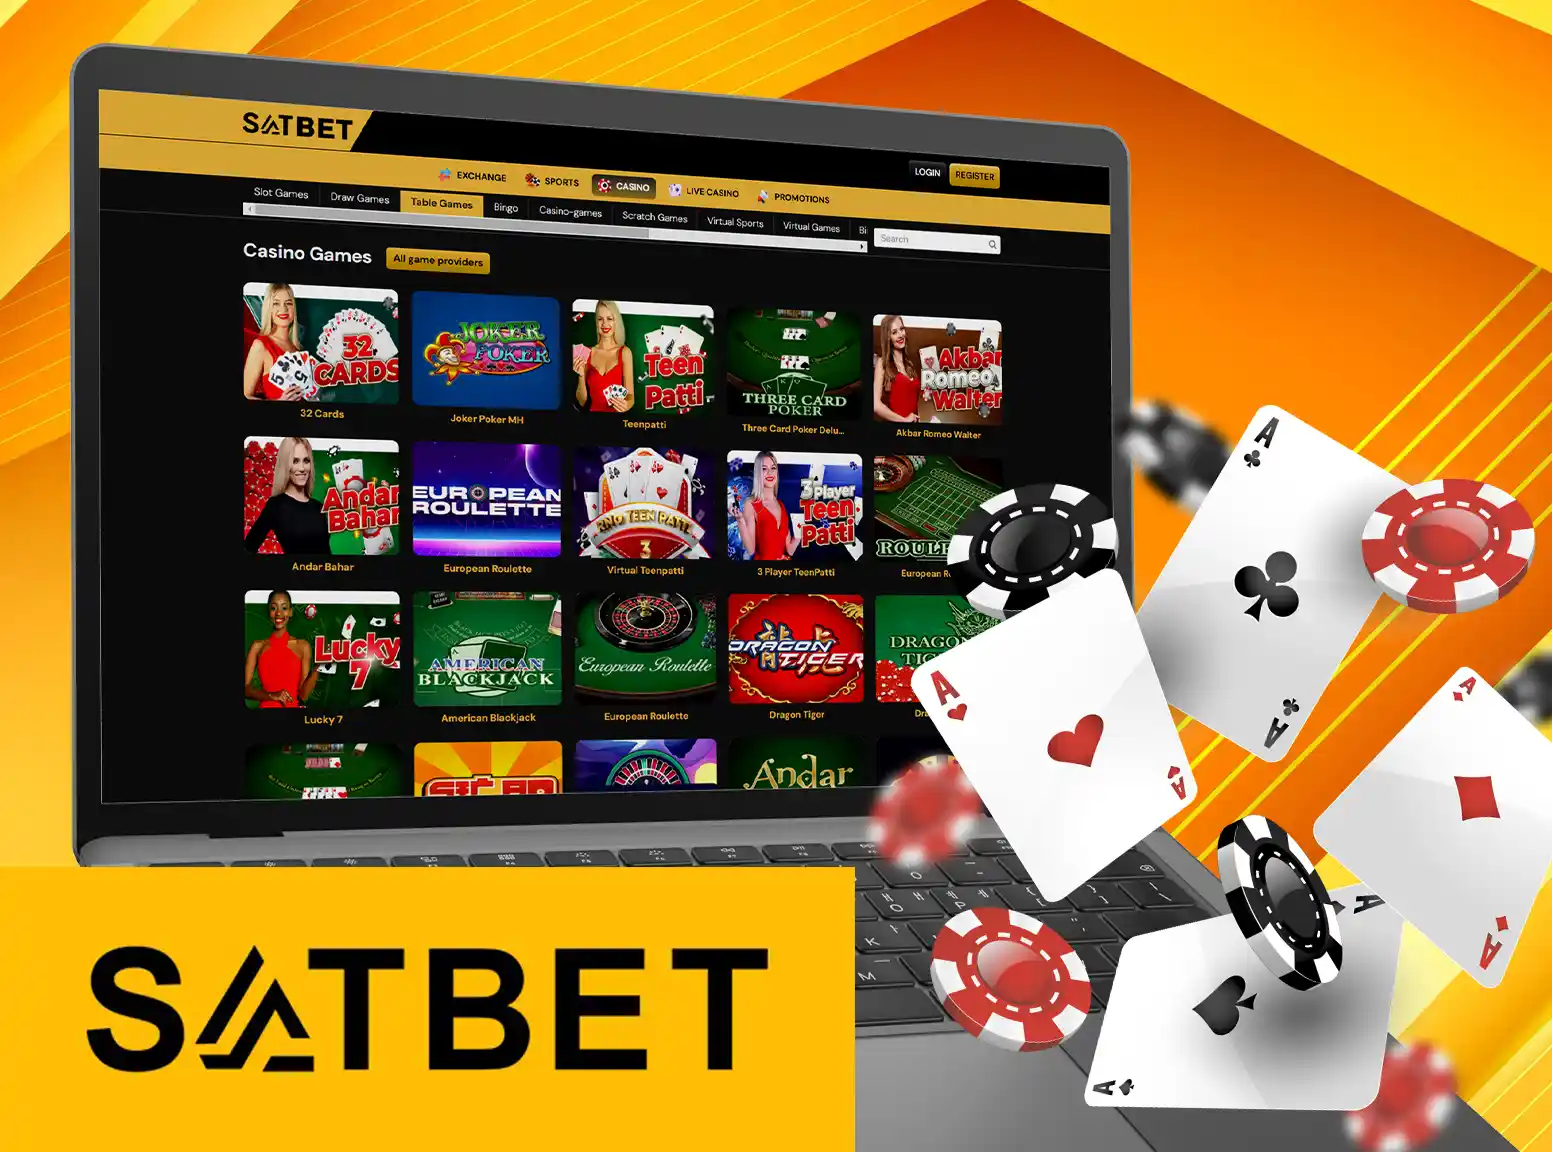 Discover a wide selection of table games at Satbet and have fun playing them.